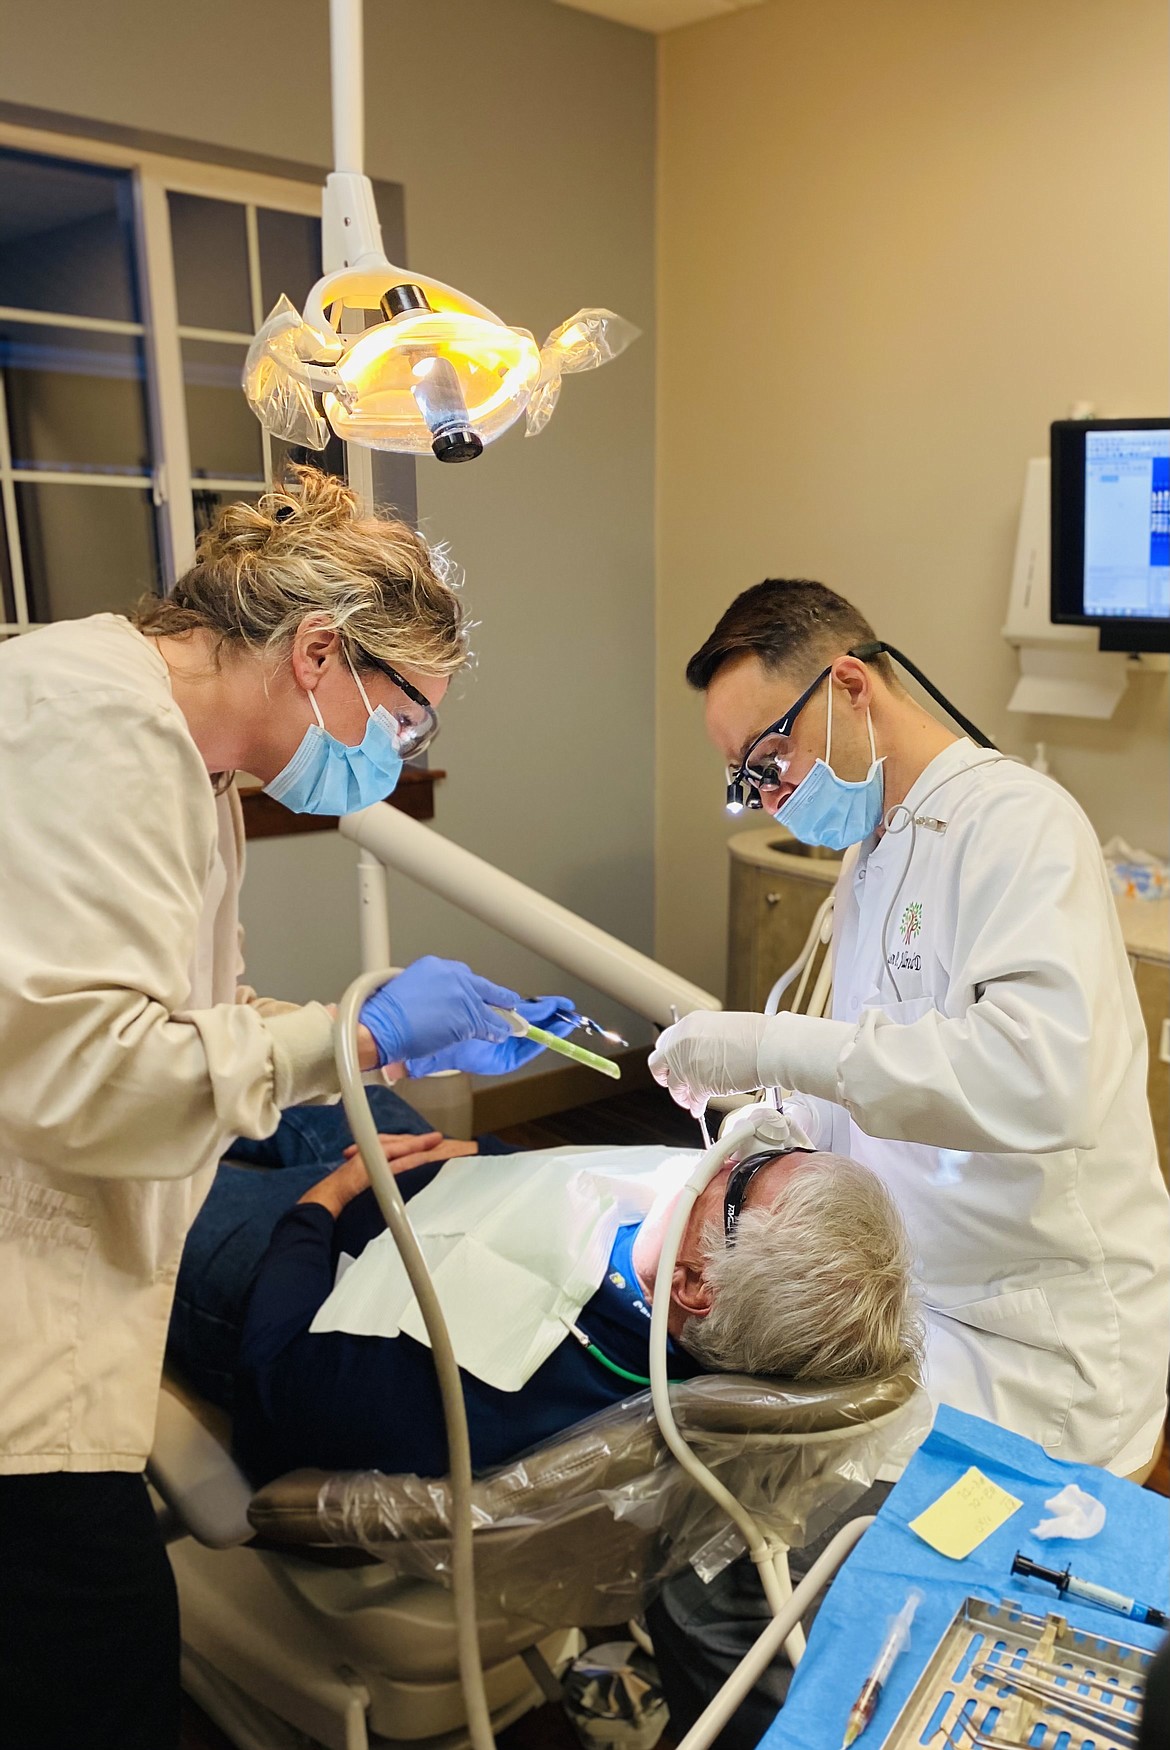 Courtesy photo
Hygienist Brandy Kitchin and Dr. Jason Allred work with patient BJ Deaustin at River City Dentistry.